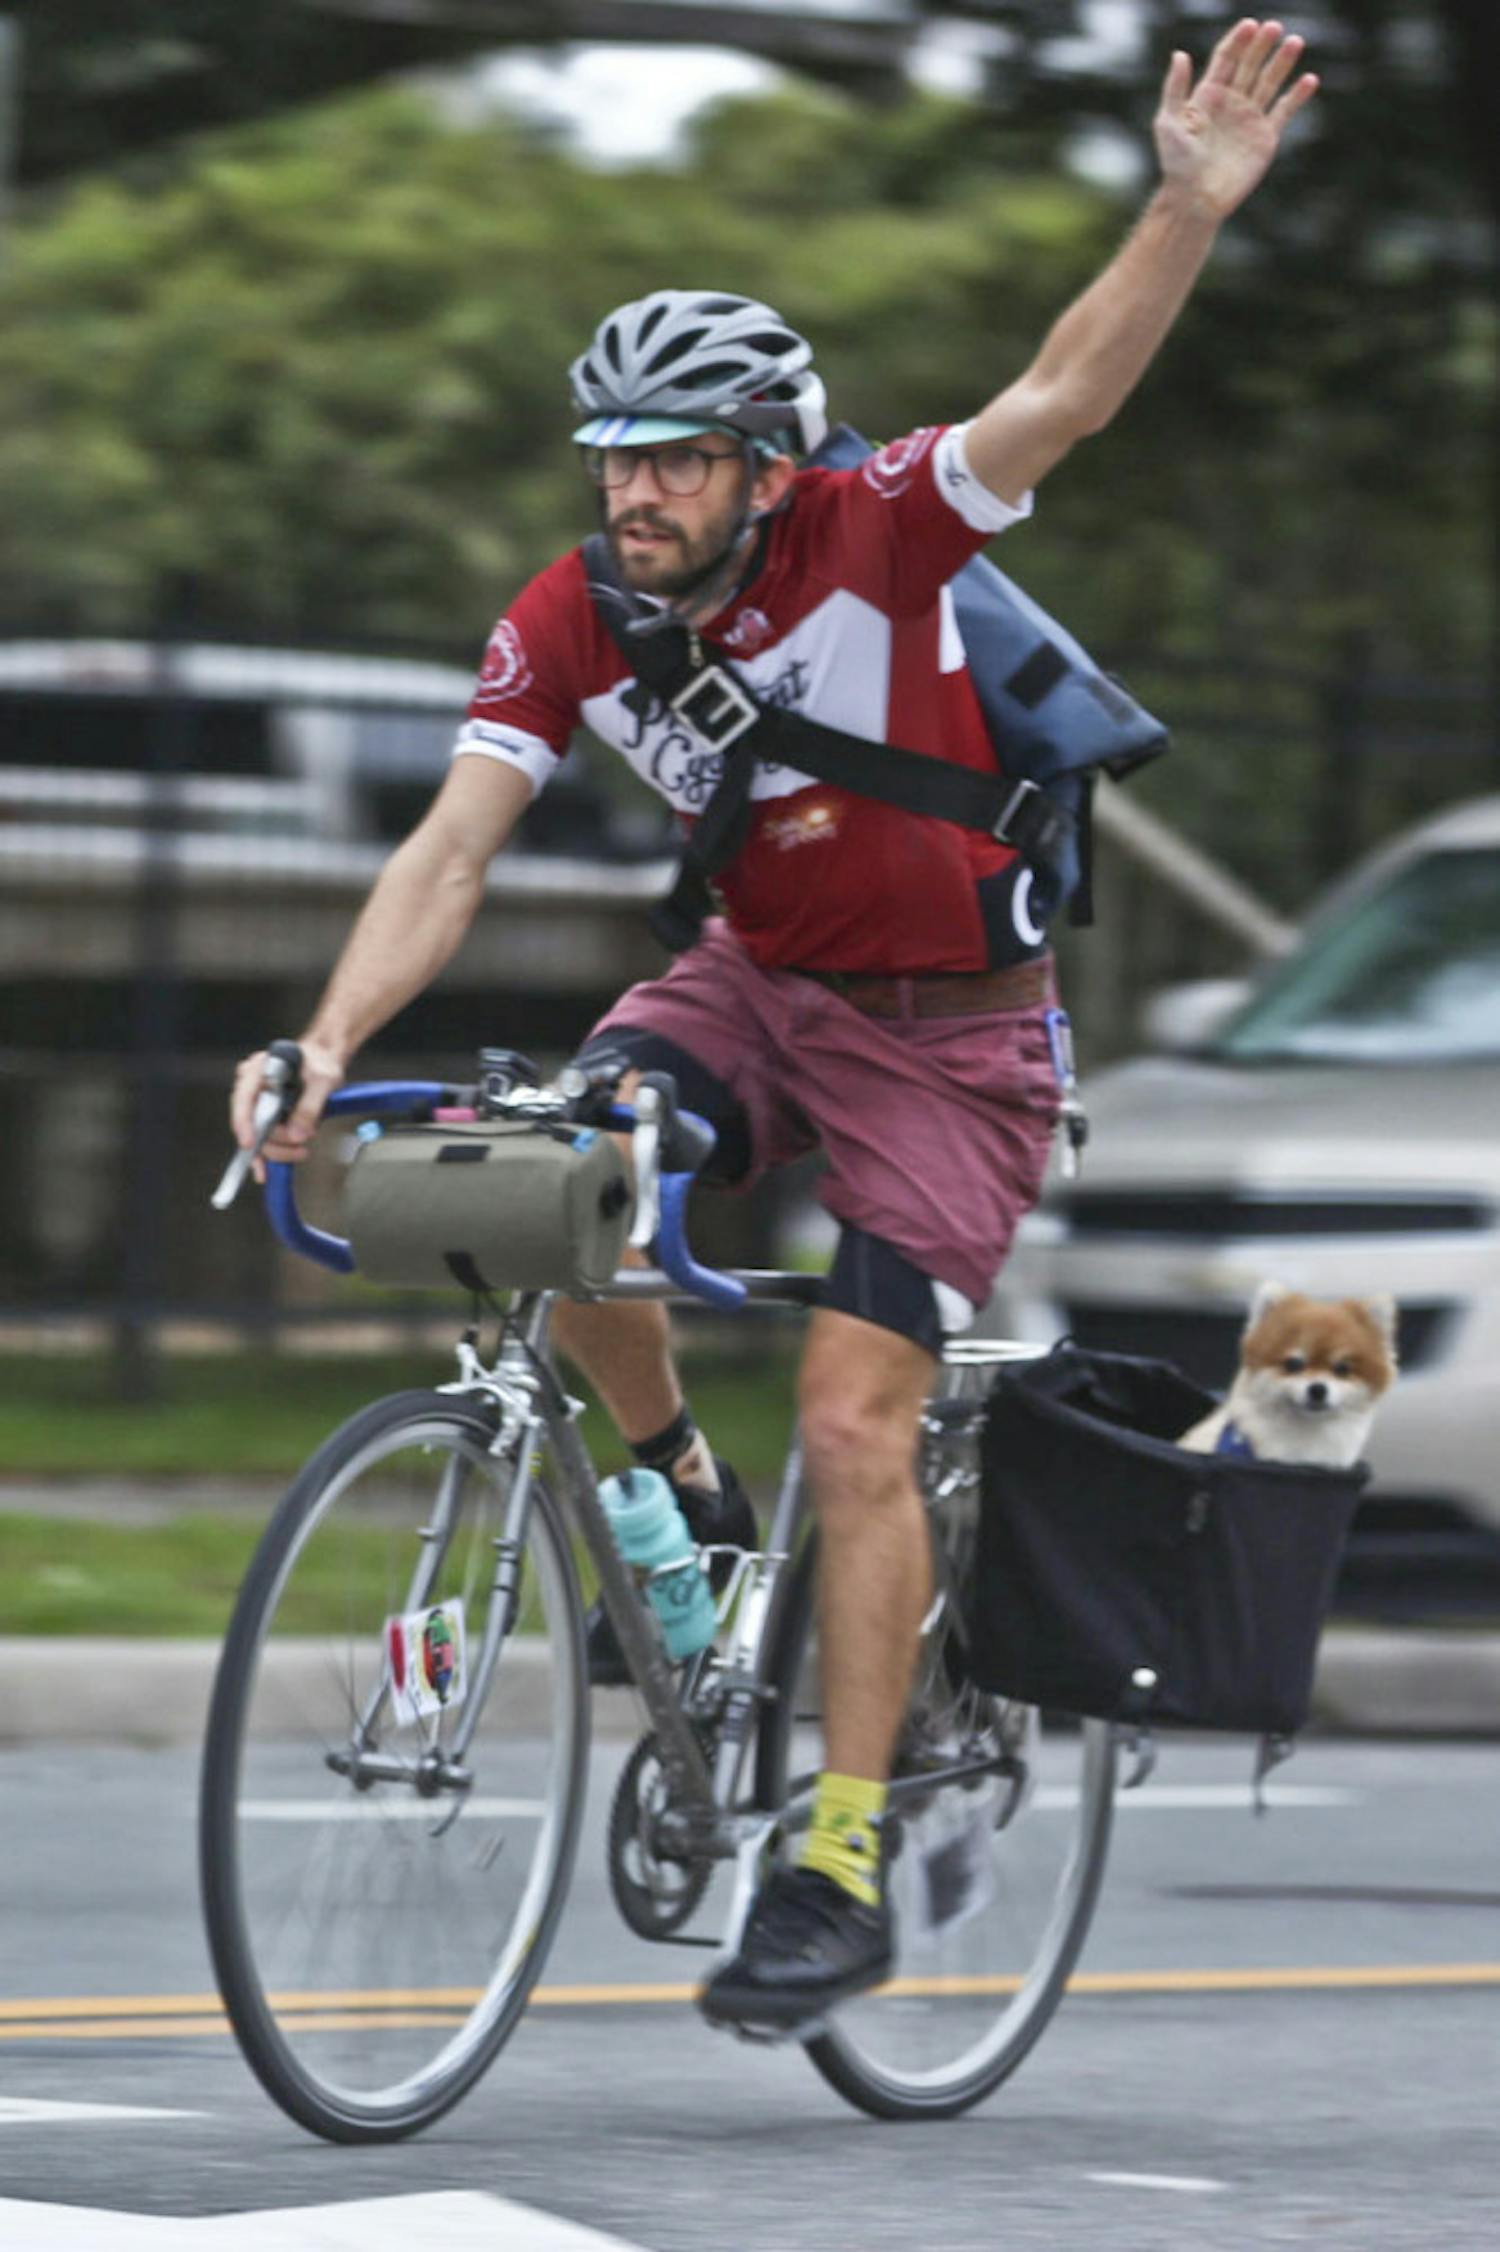 Chris Discenza, a 38-year-old UF coastal engineering graduate student, finishes The Freewheel Project’s third annual Cranksgiving alleycat race with Cauchy, his 7-year-old Pomeranian, on Nov. 22, 2015. “He loves the bike more than anything,” Discenza said. “He was also registered for the race, so I came in 25th and he technically came in 26th.”